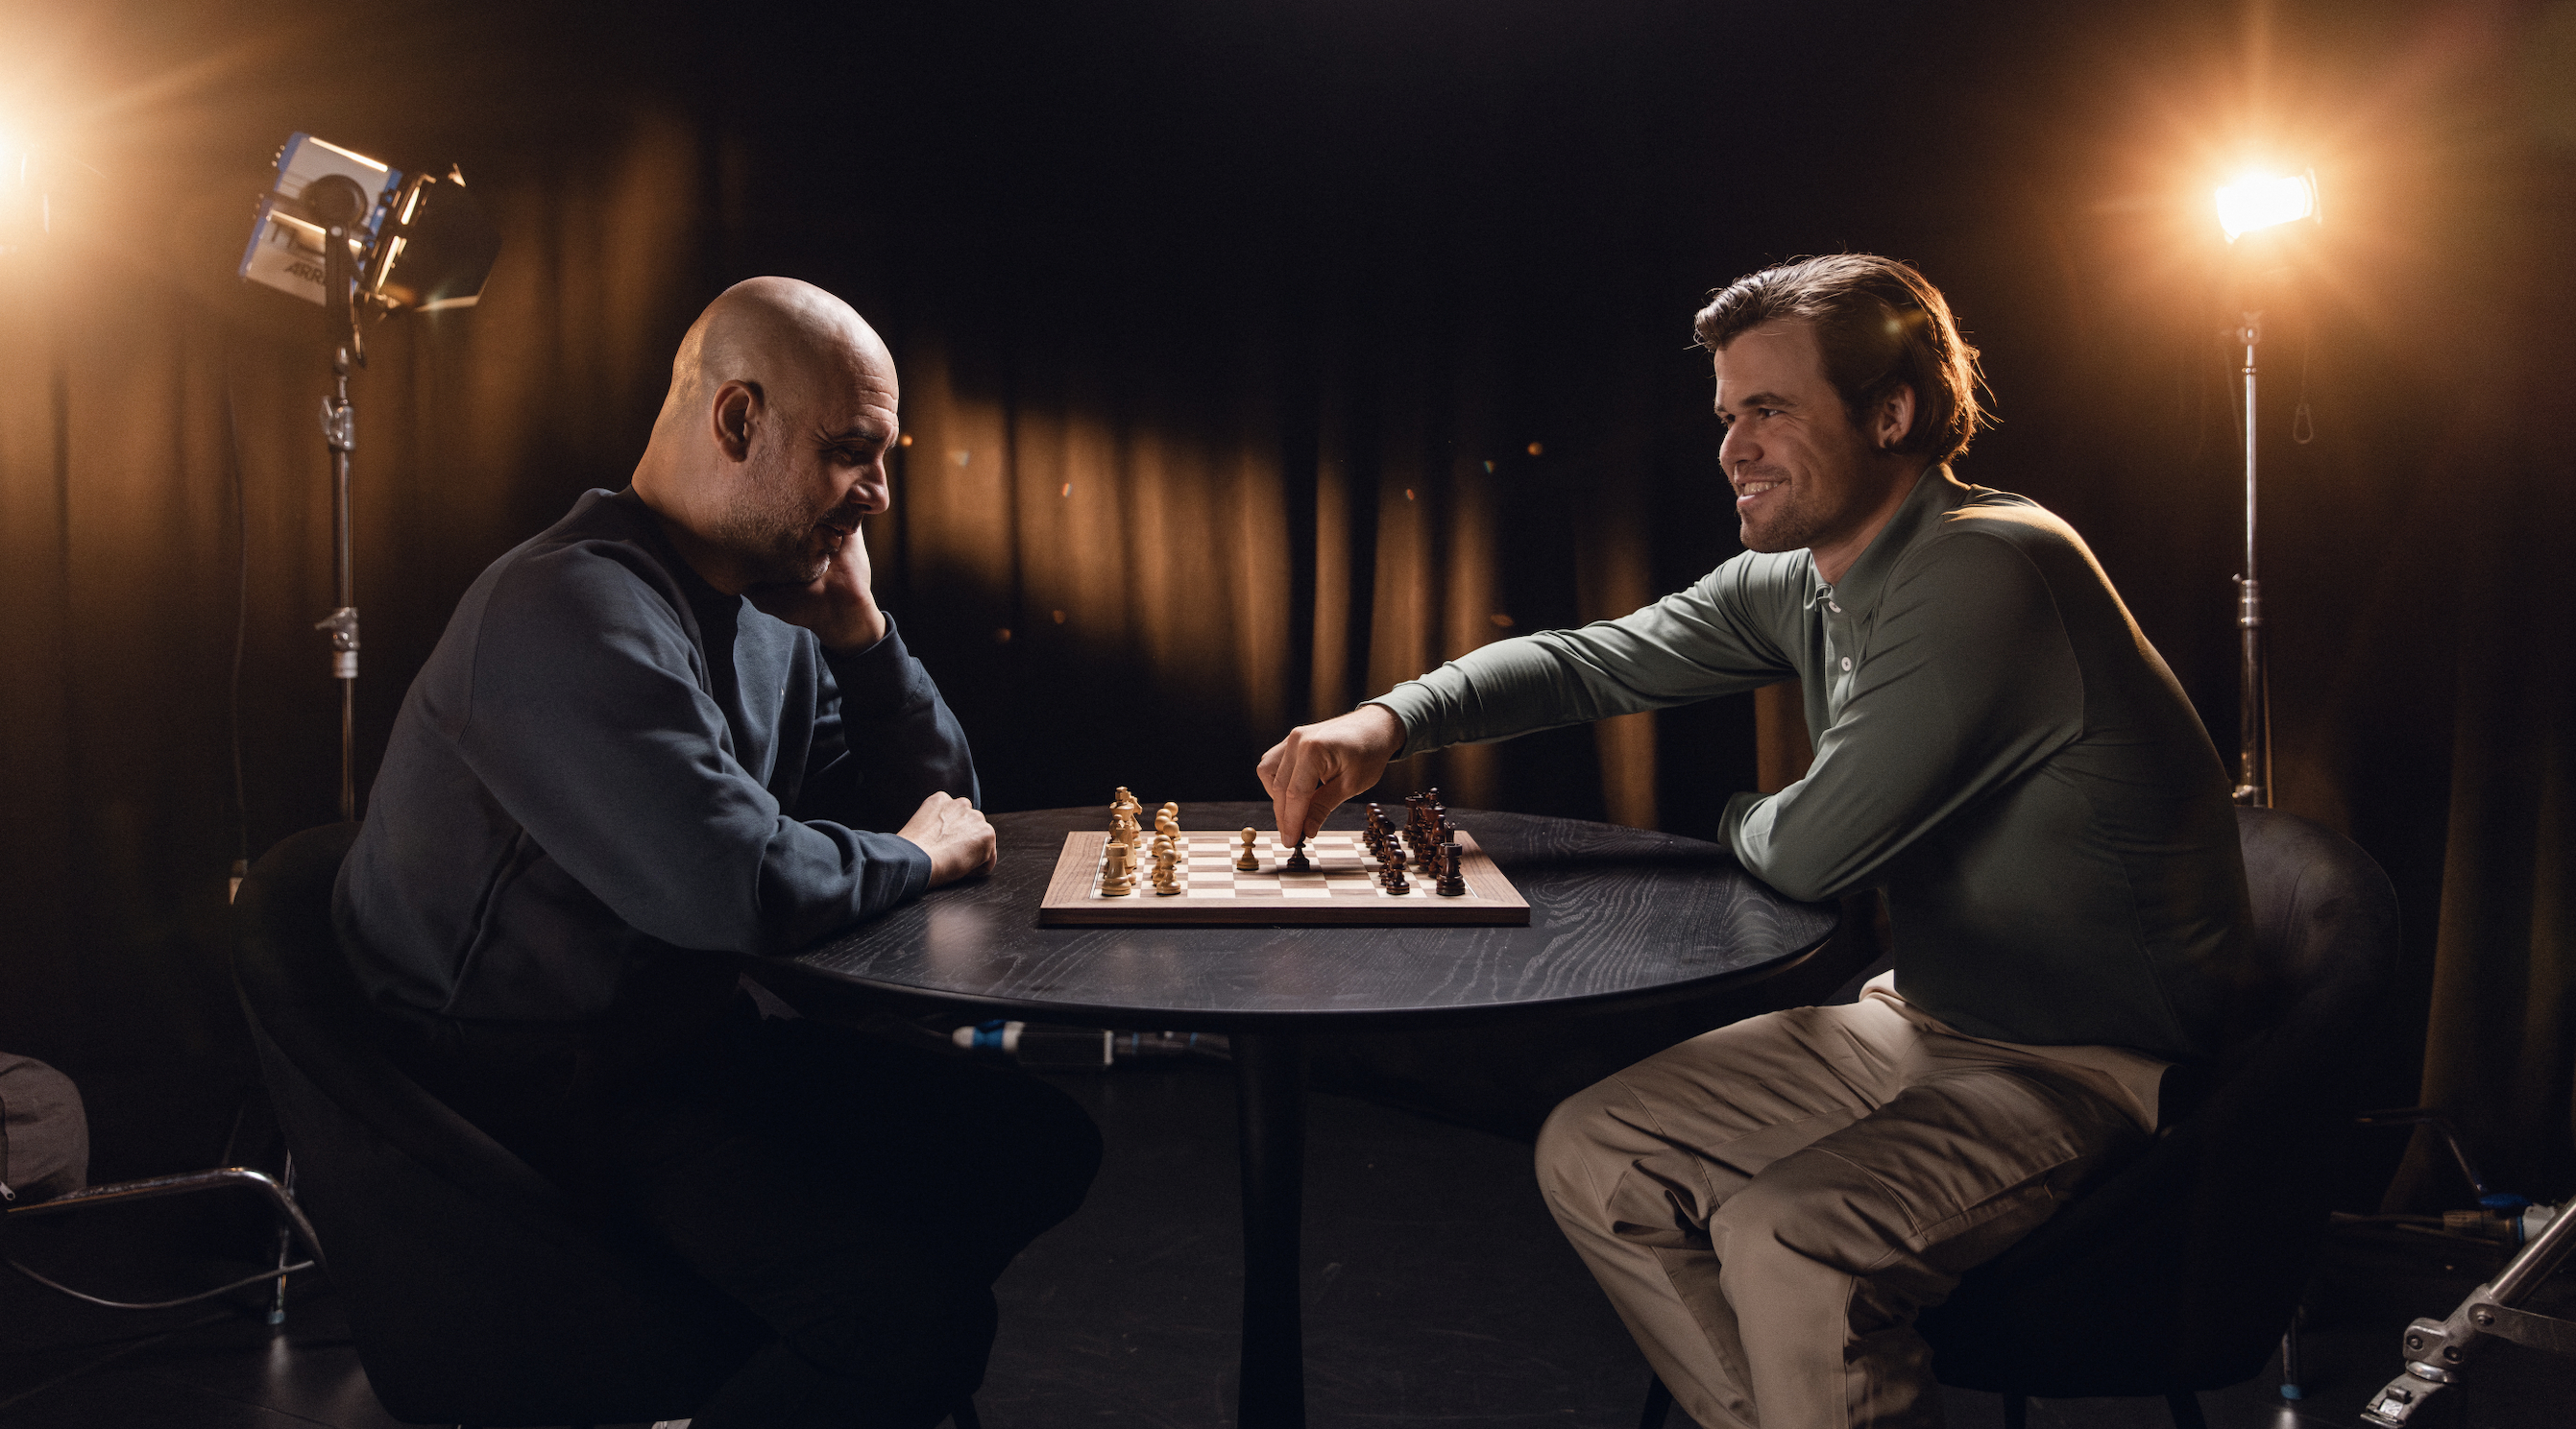 two person play? - Chess Forums 